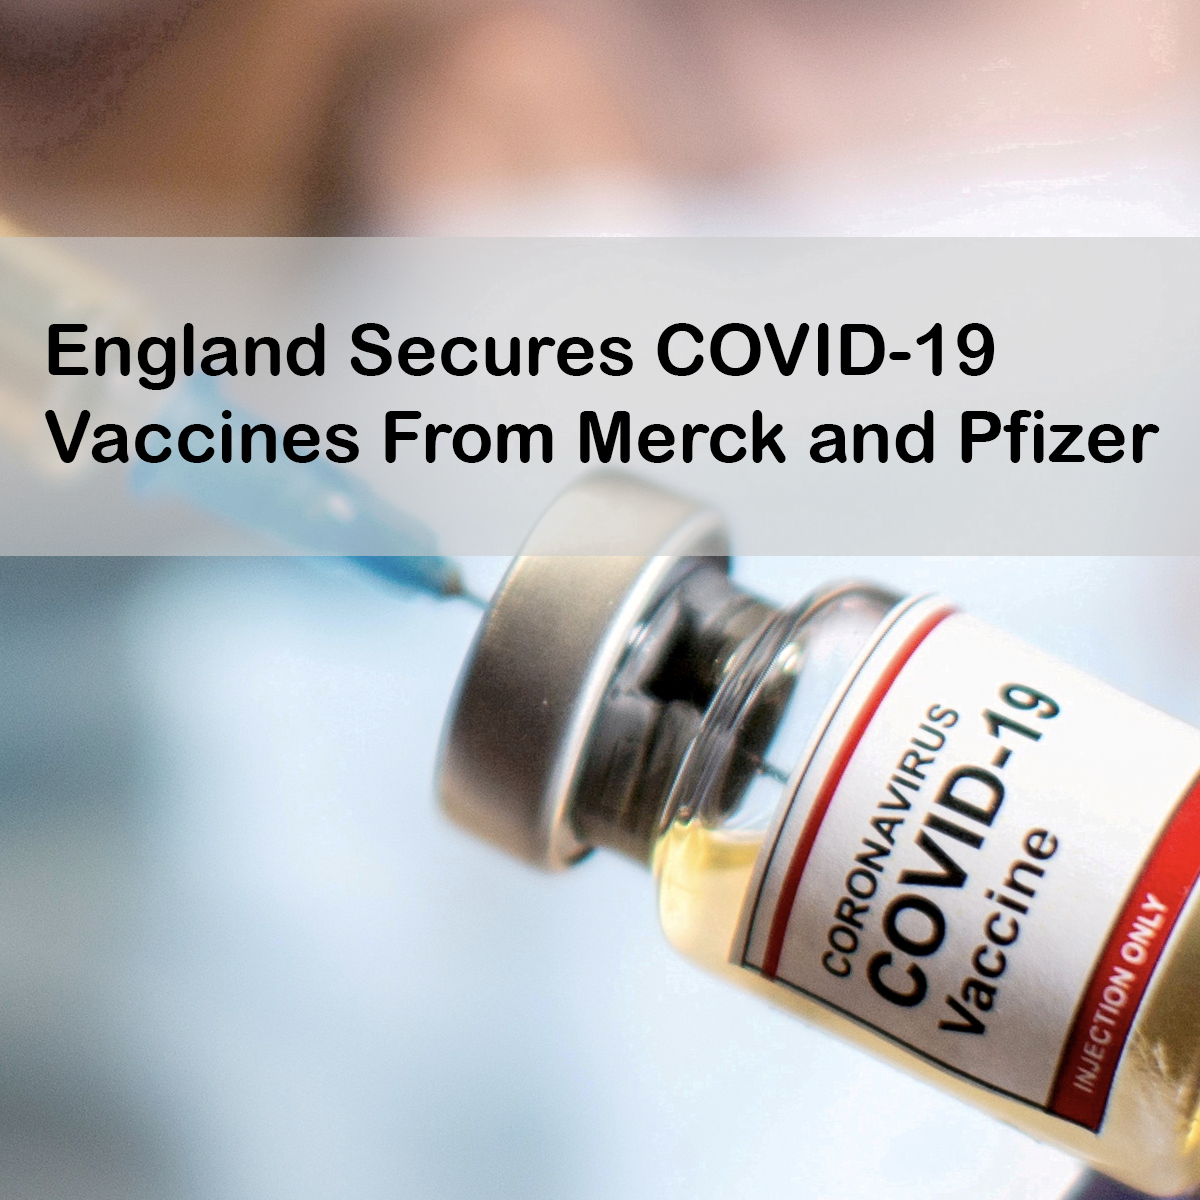 England Secures COVID-19 Vaccines From Merck and Pfizer